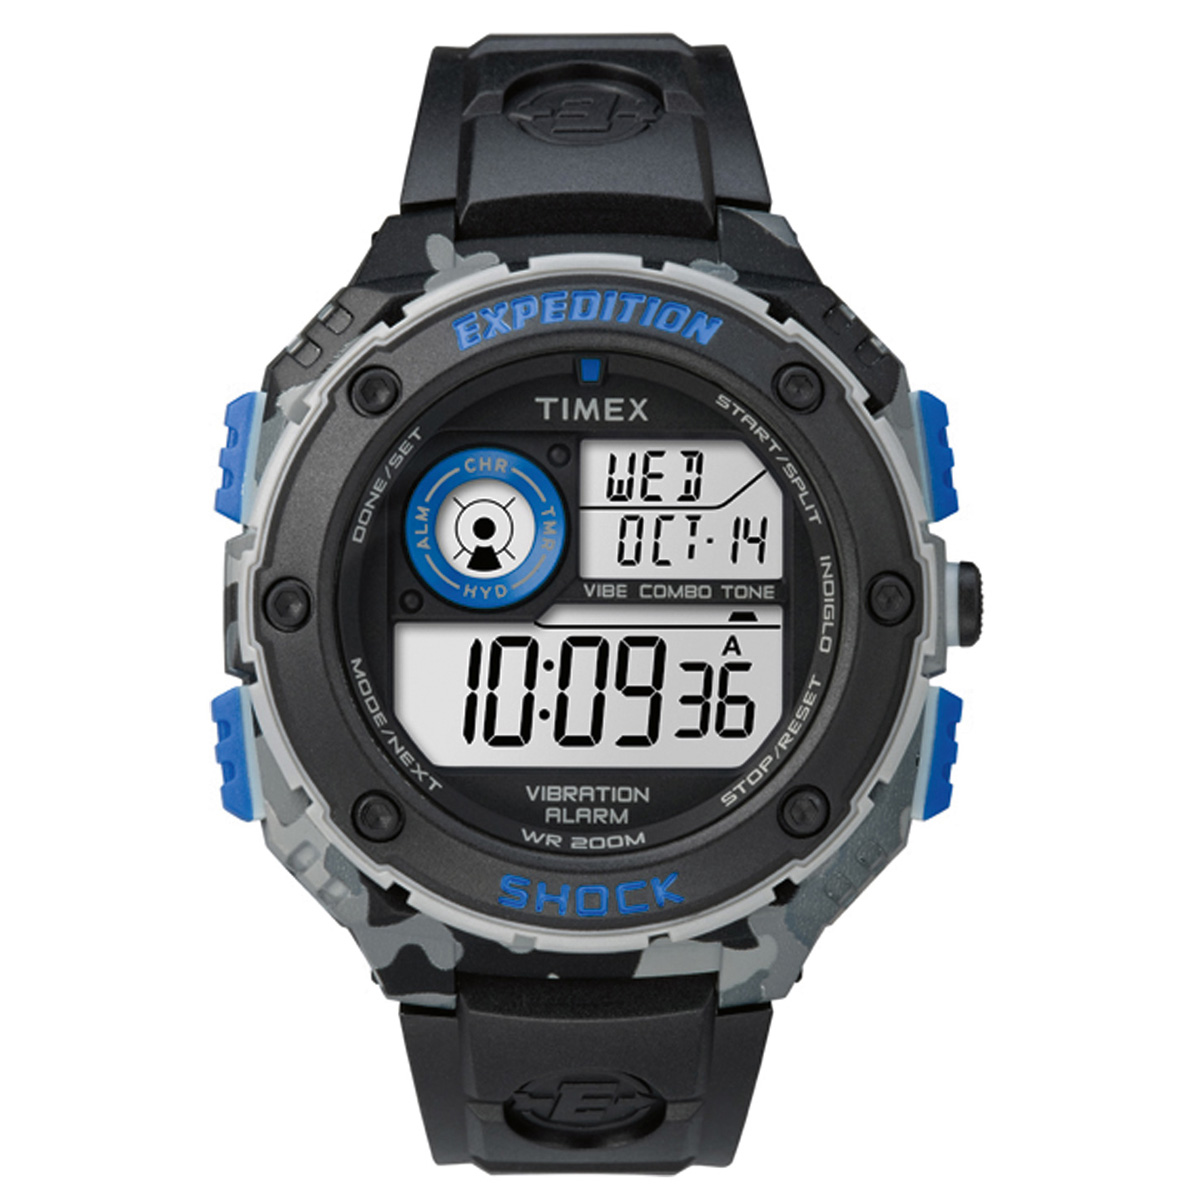 Timex Expedition Shock TW4B00300 3345